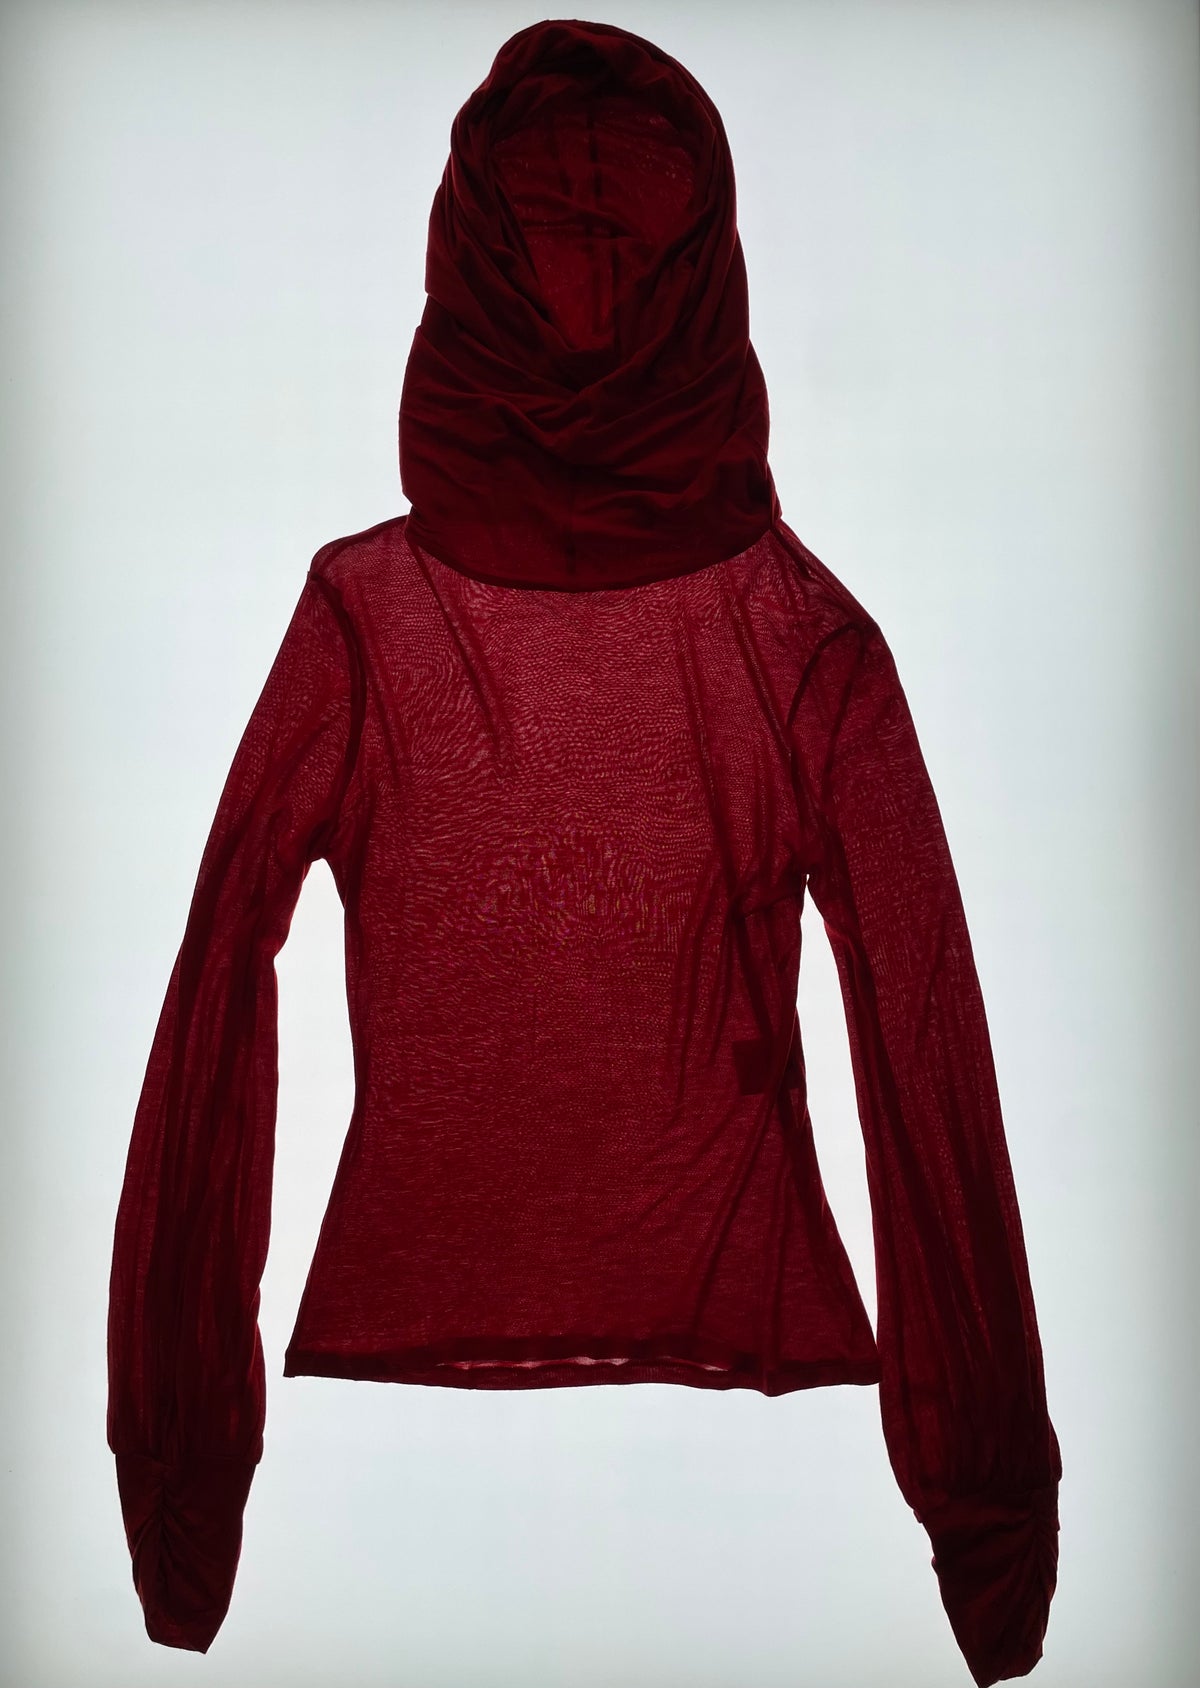 Red Hooded Top